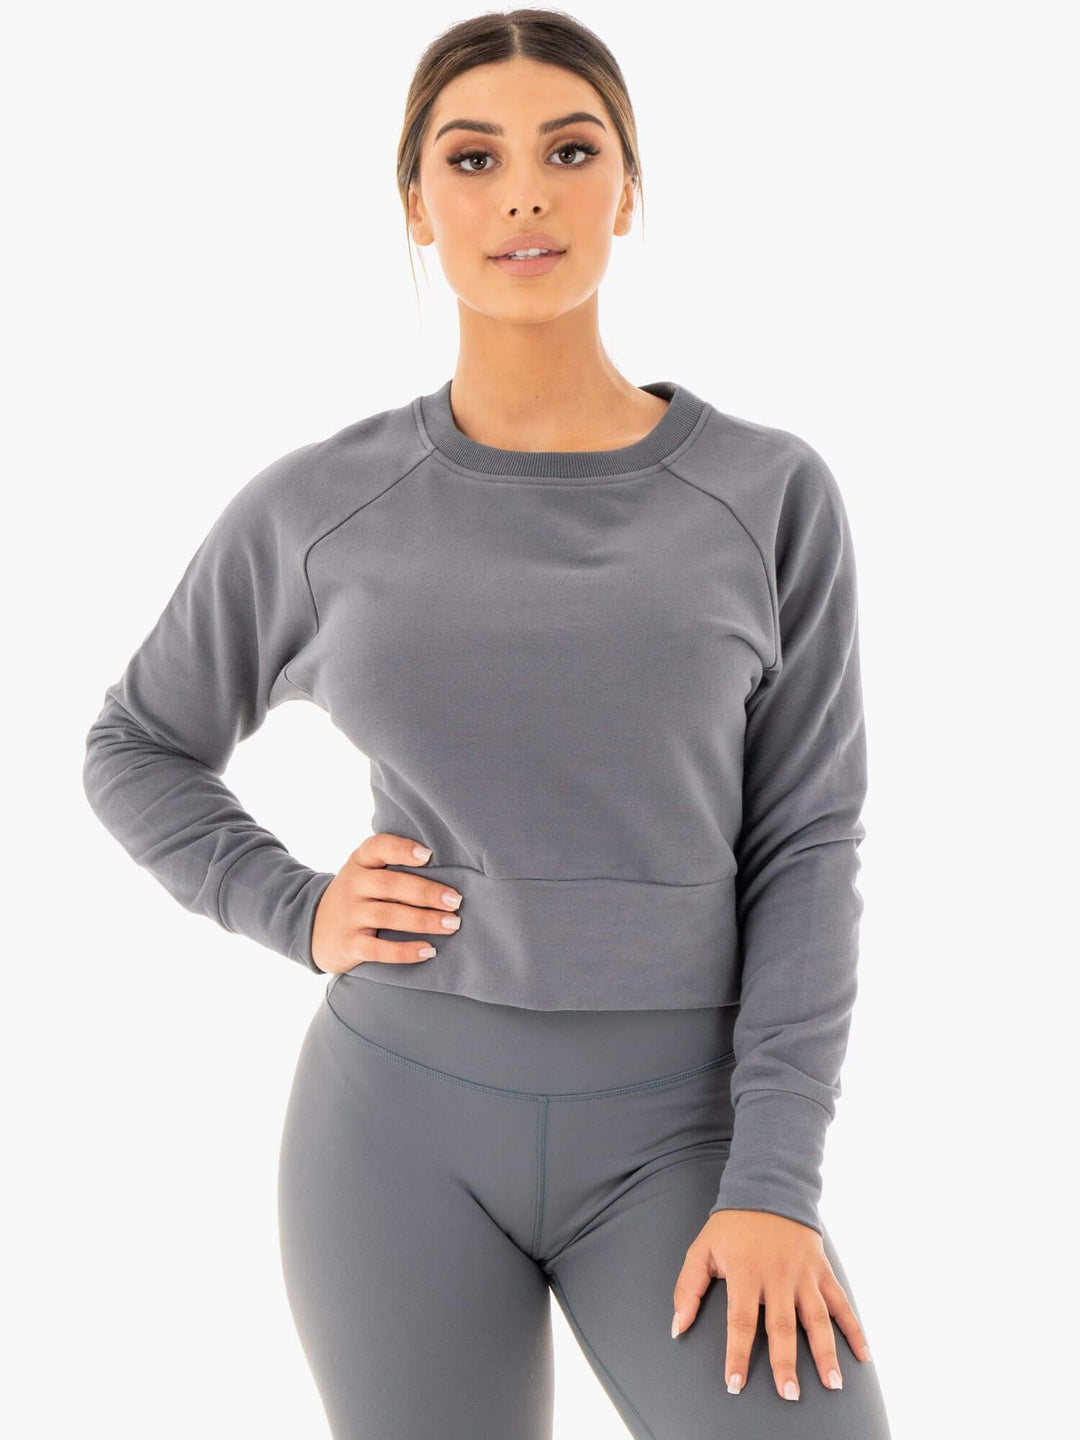 Motion Sweater - Charcoal Clothing Ryderwear 